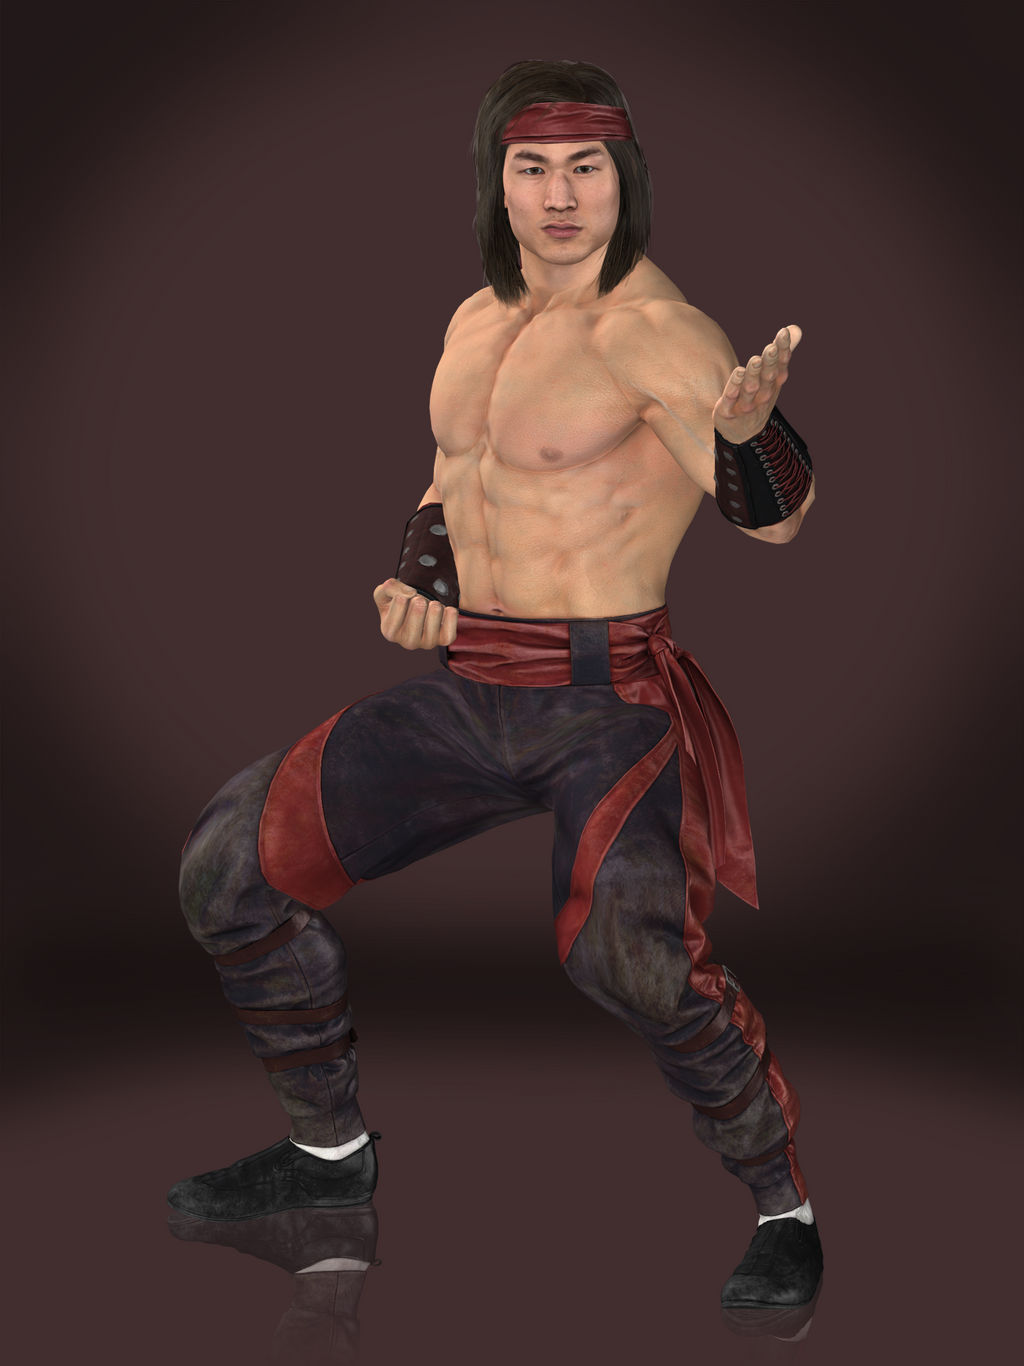 liu_kang__young_justice__by_sticklove_dd8b2t7-fullview.jpg